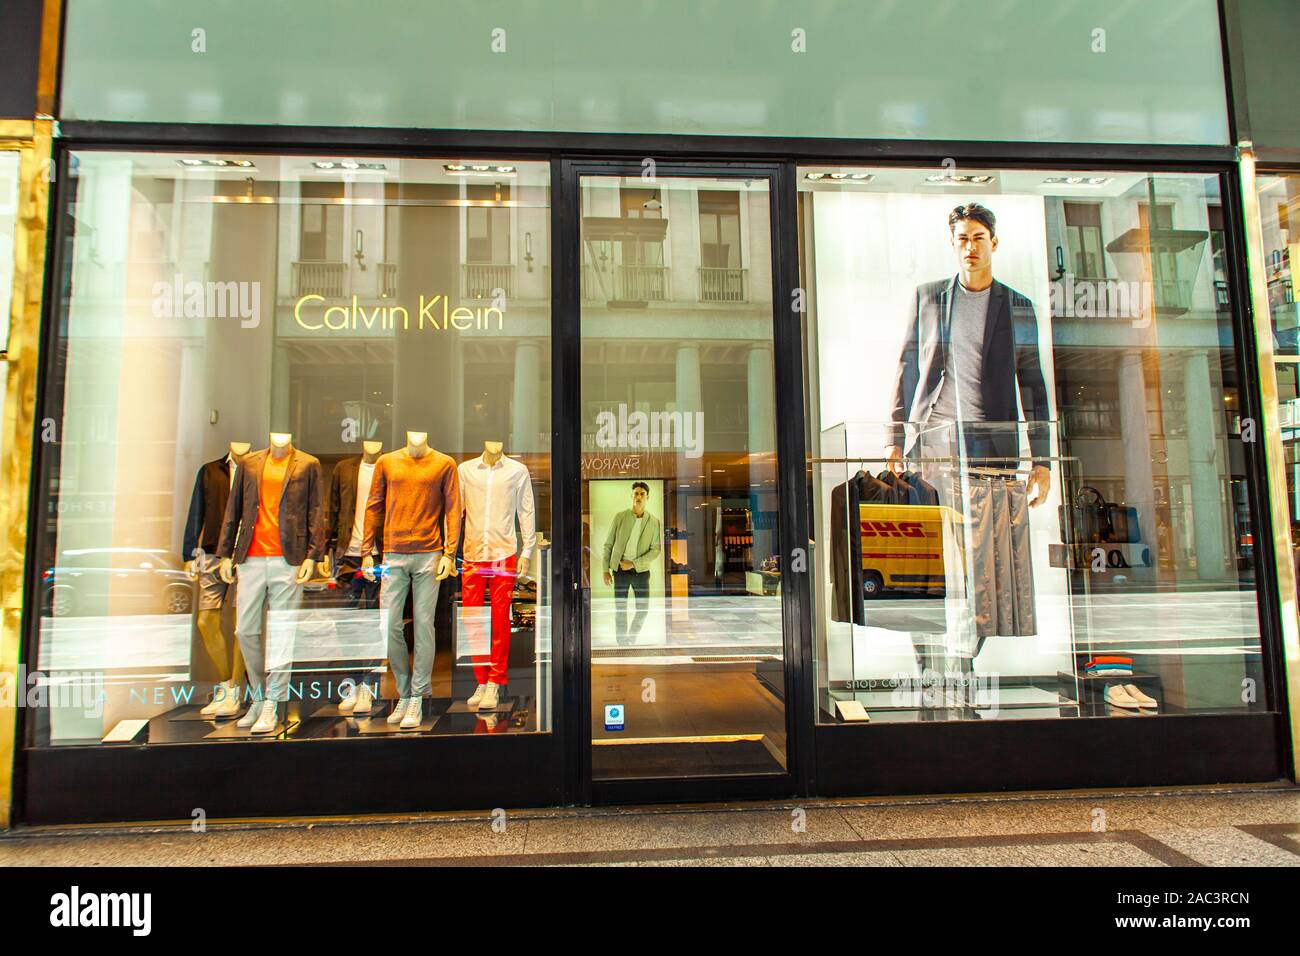 TURIN, ITALY - JUNE 3, 2015: Detail of Calvin Klein store in Turin, Italy.  It is an American fashion house founded in 1968 Stock Photo - Alamy